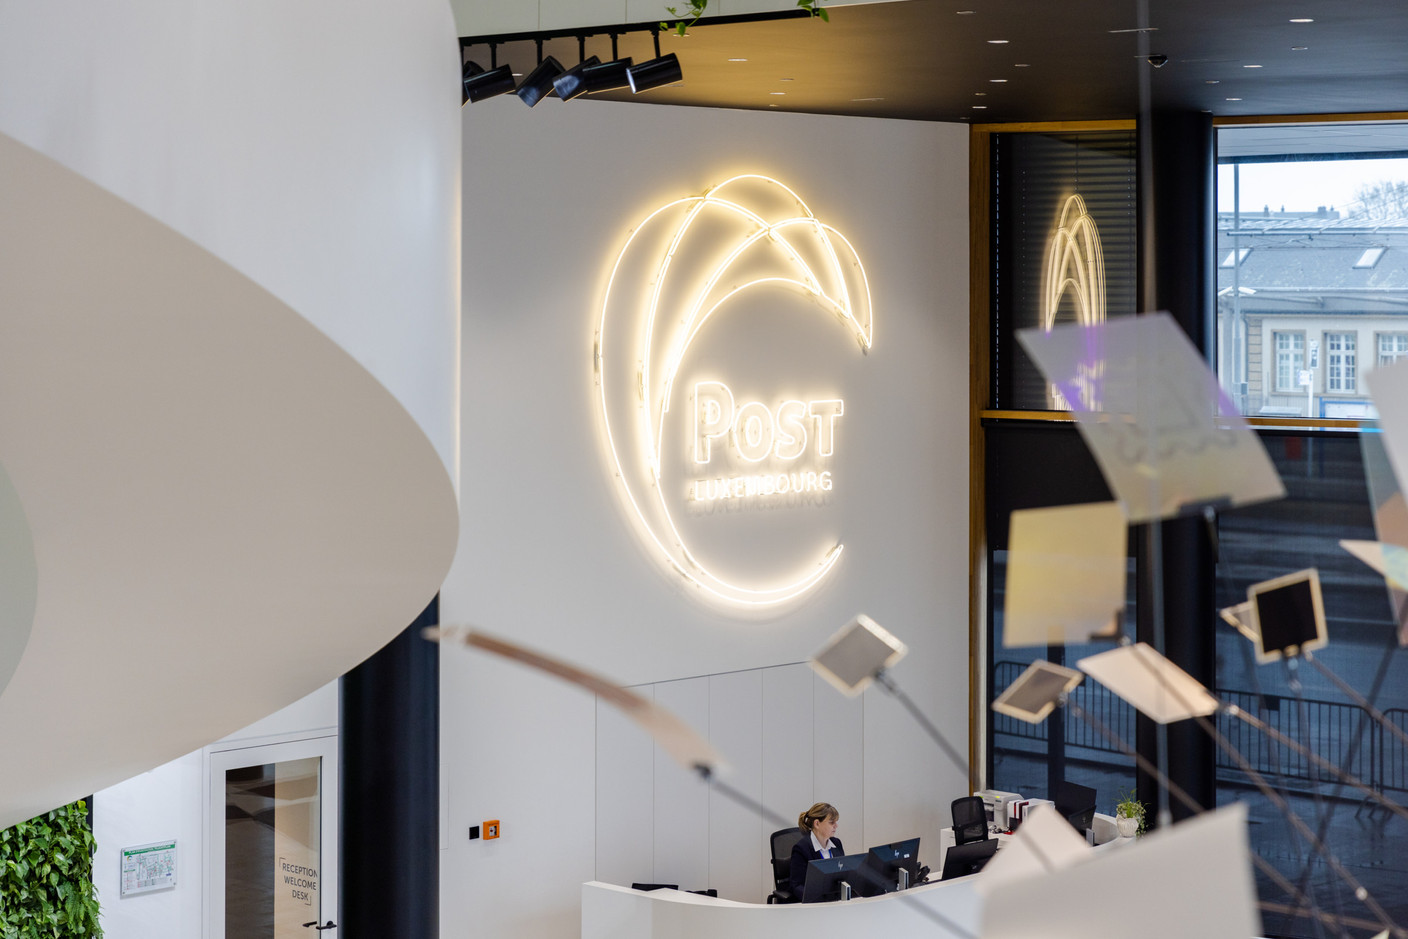 The Post Luxembourg logo is in neon in the entrance hall. Photo: Romain Gamba/Maison Moderne